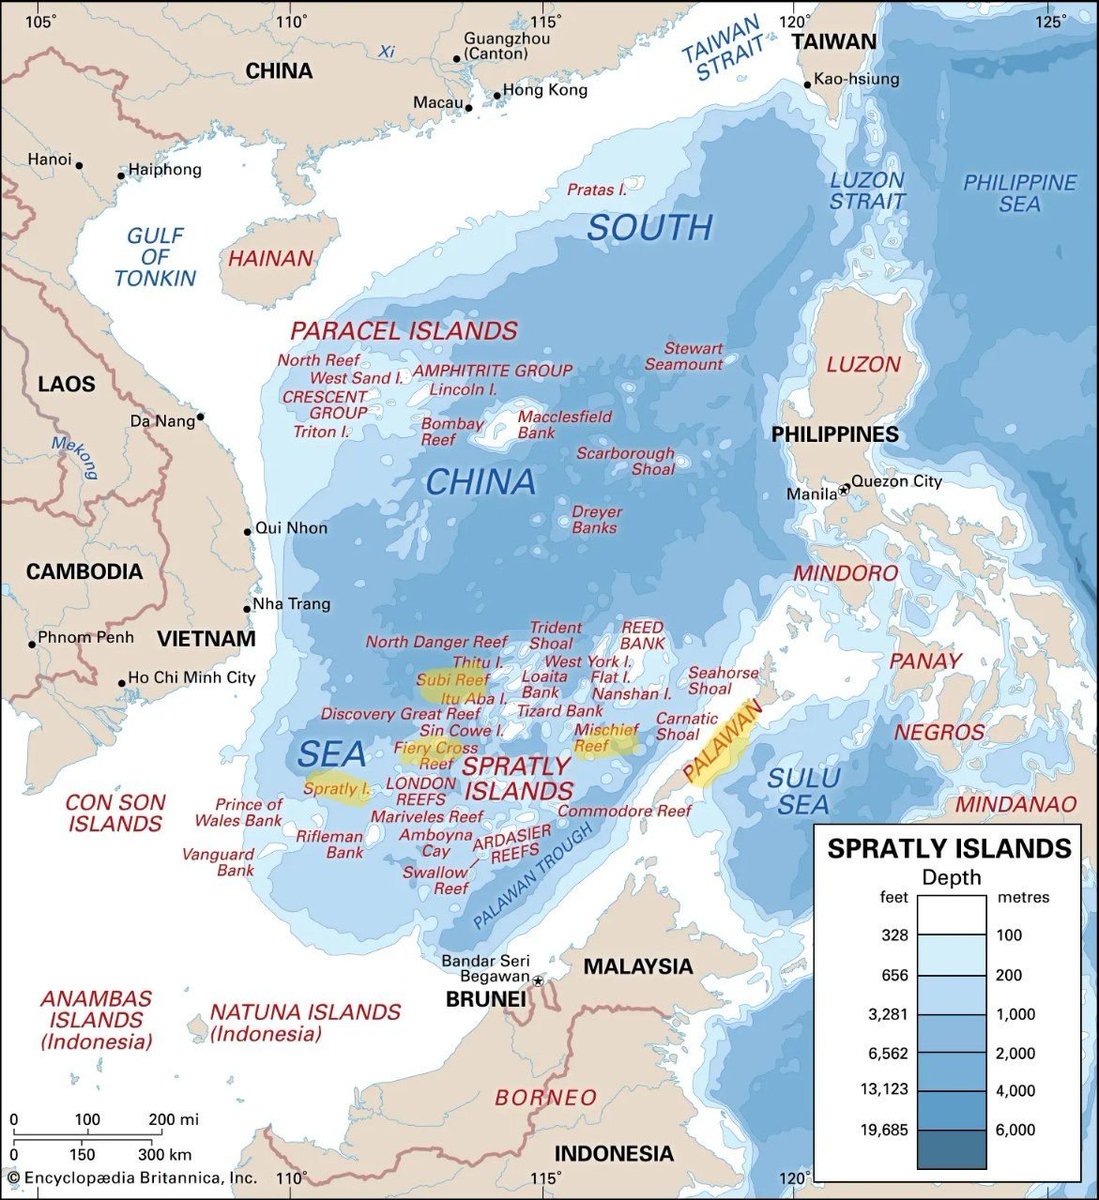 🔘In This article contains islands and reefs located in the South China Sea. ❄️Spartly Island-The Spratly Islands themselves are claimed by multiple countries in the region, including China, Taiwan, Vietnam, the Philippines, and Malaysia. ❄️Thomas Shoal-Controlled by Phillipines…